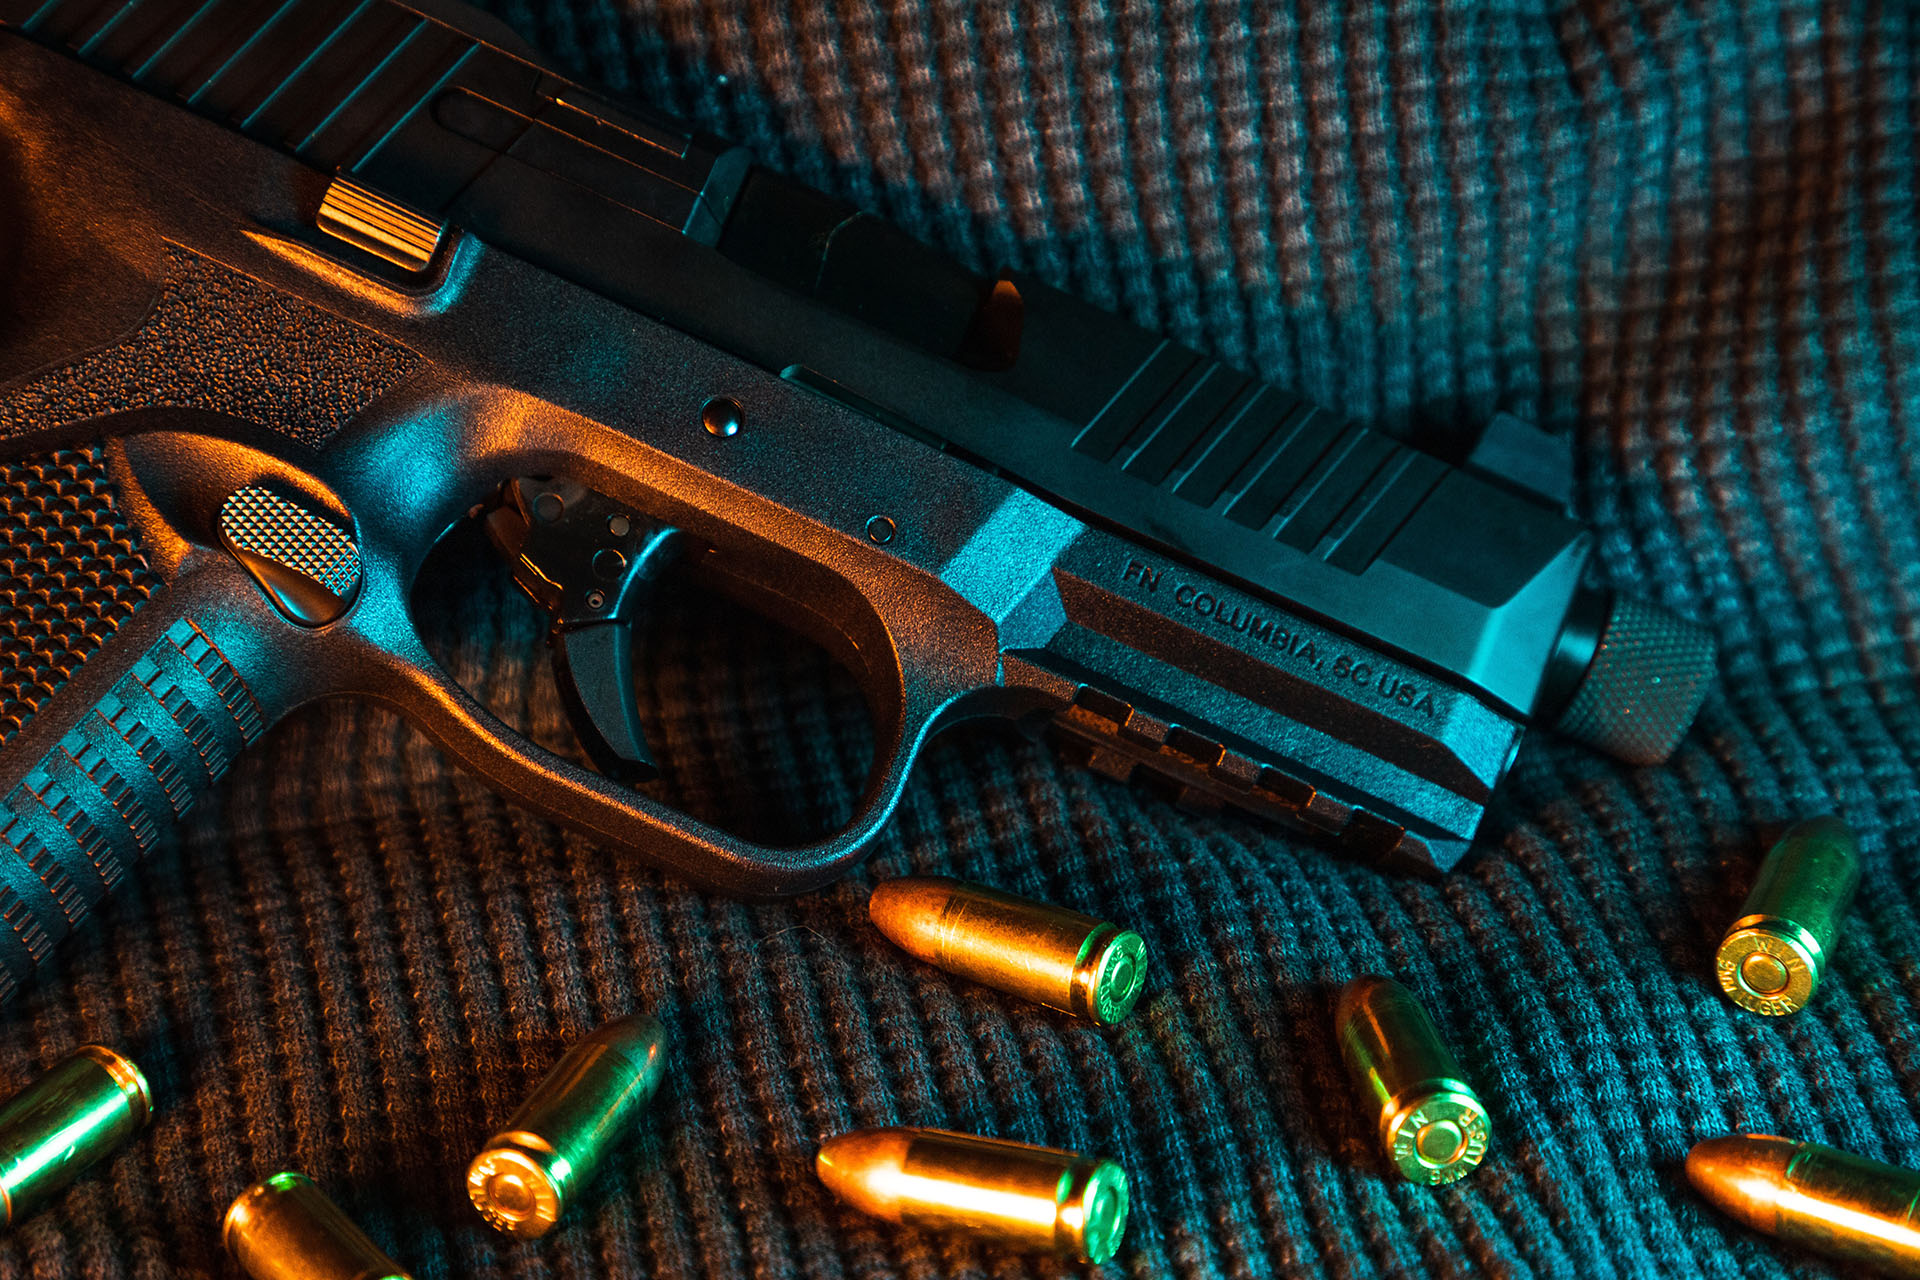 Why Adobe Commerce Works for Firearms eCommerce Sites